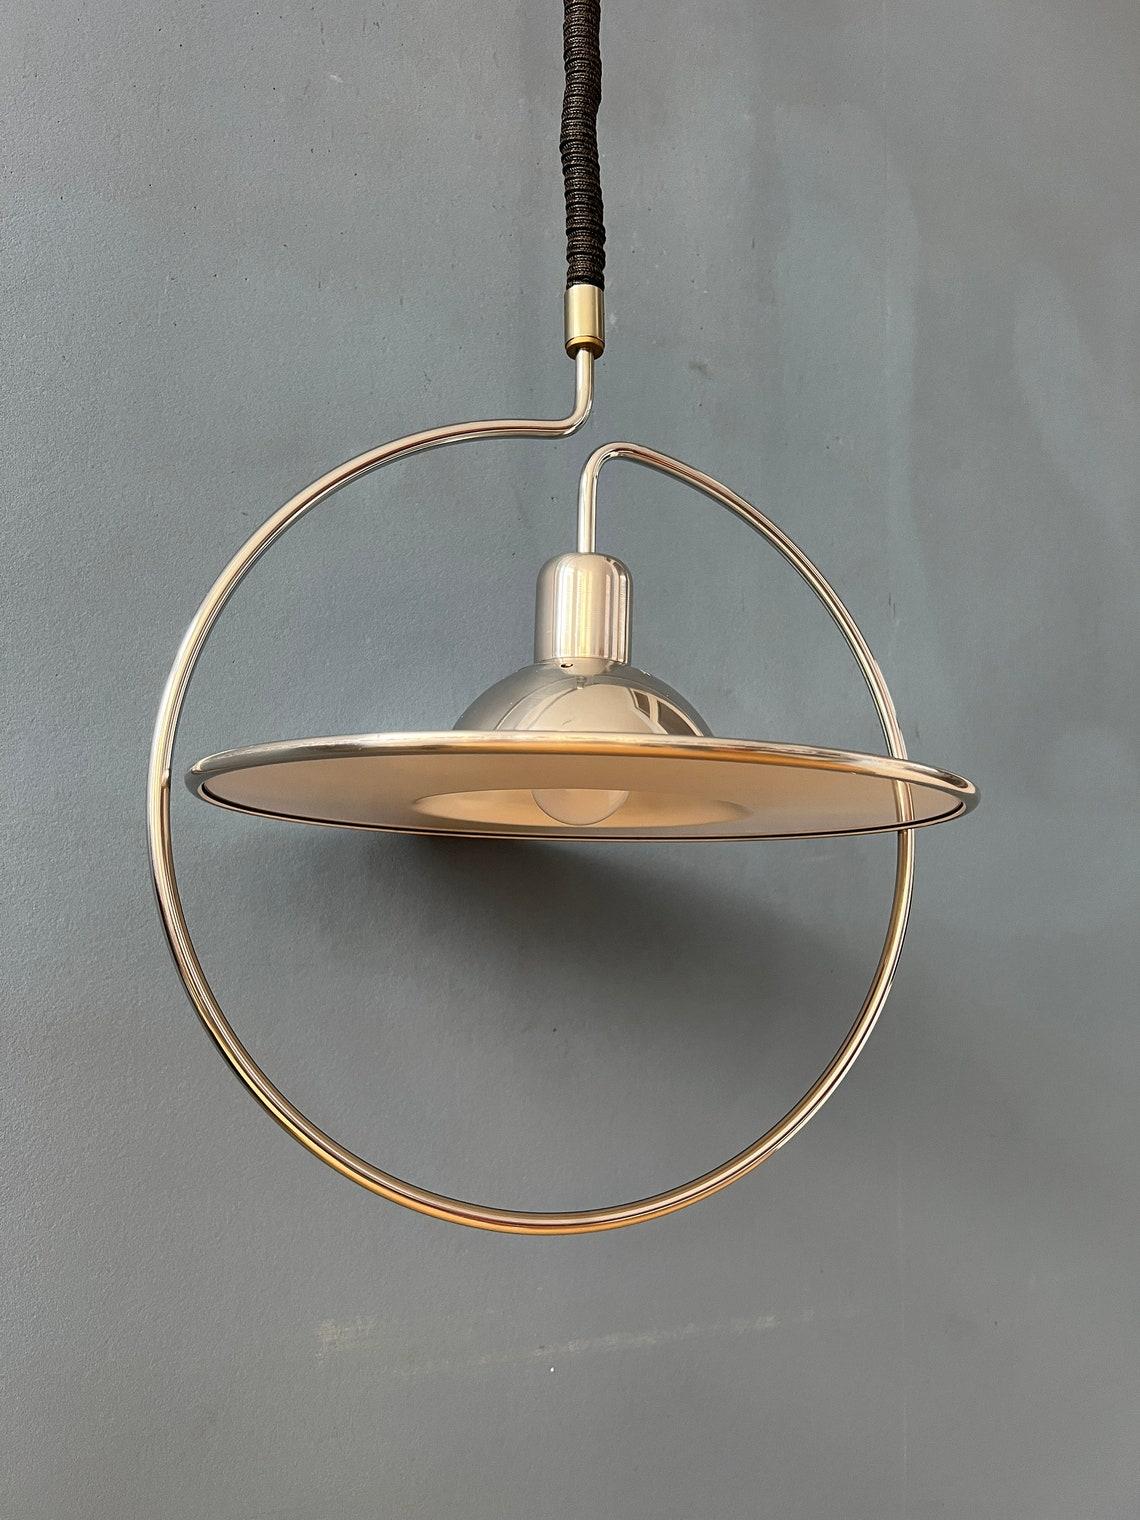 Mid Century UFO Pendant Lamp with Decorative Chrome Frame, 1970s For Sale 3